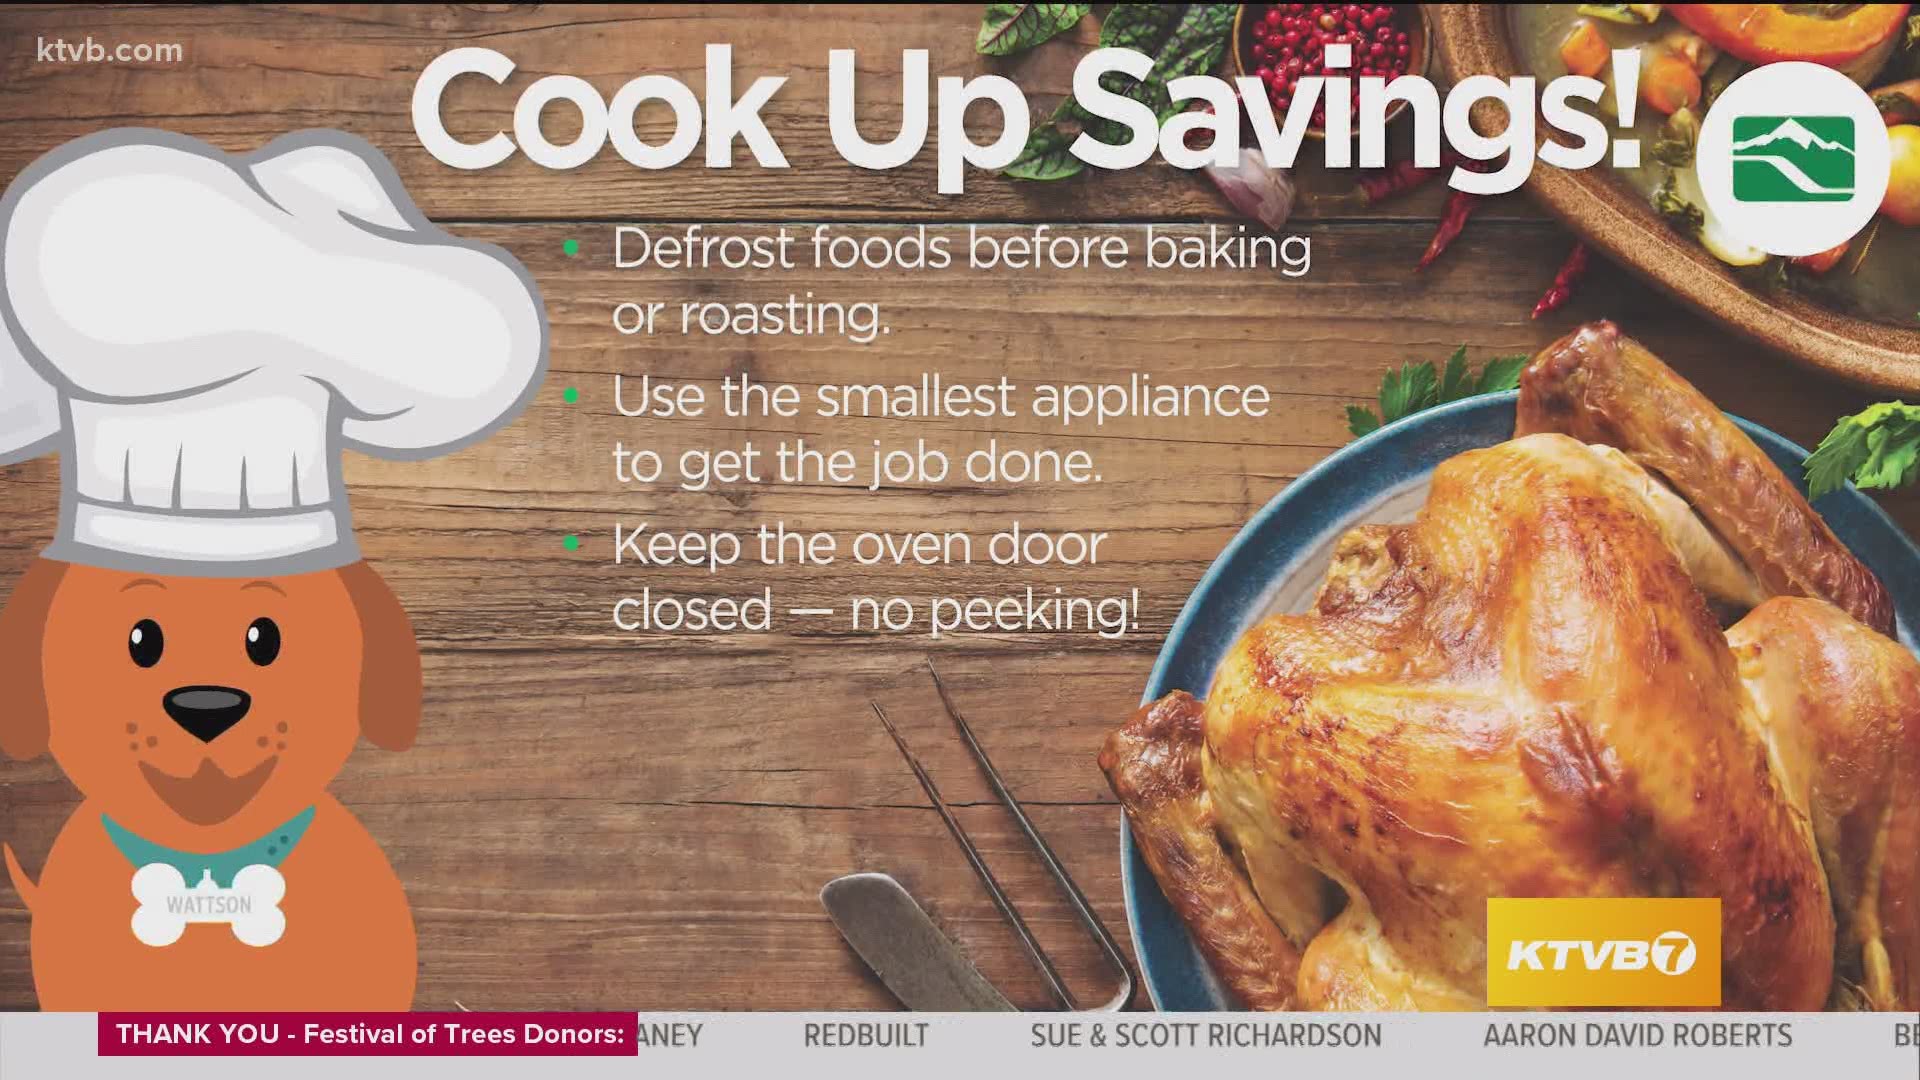 Danielle with Idaho Power gives us tips on how to save energy & money in the kitchen during the Holiday season.